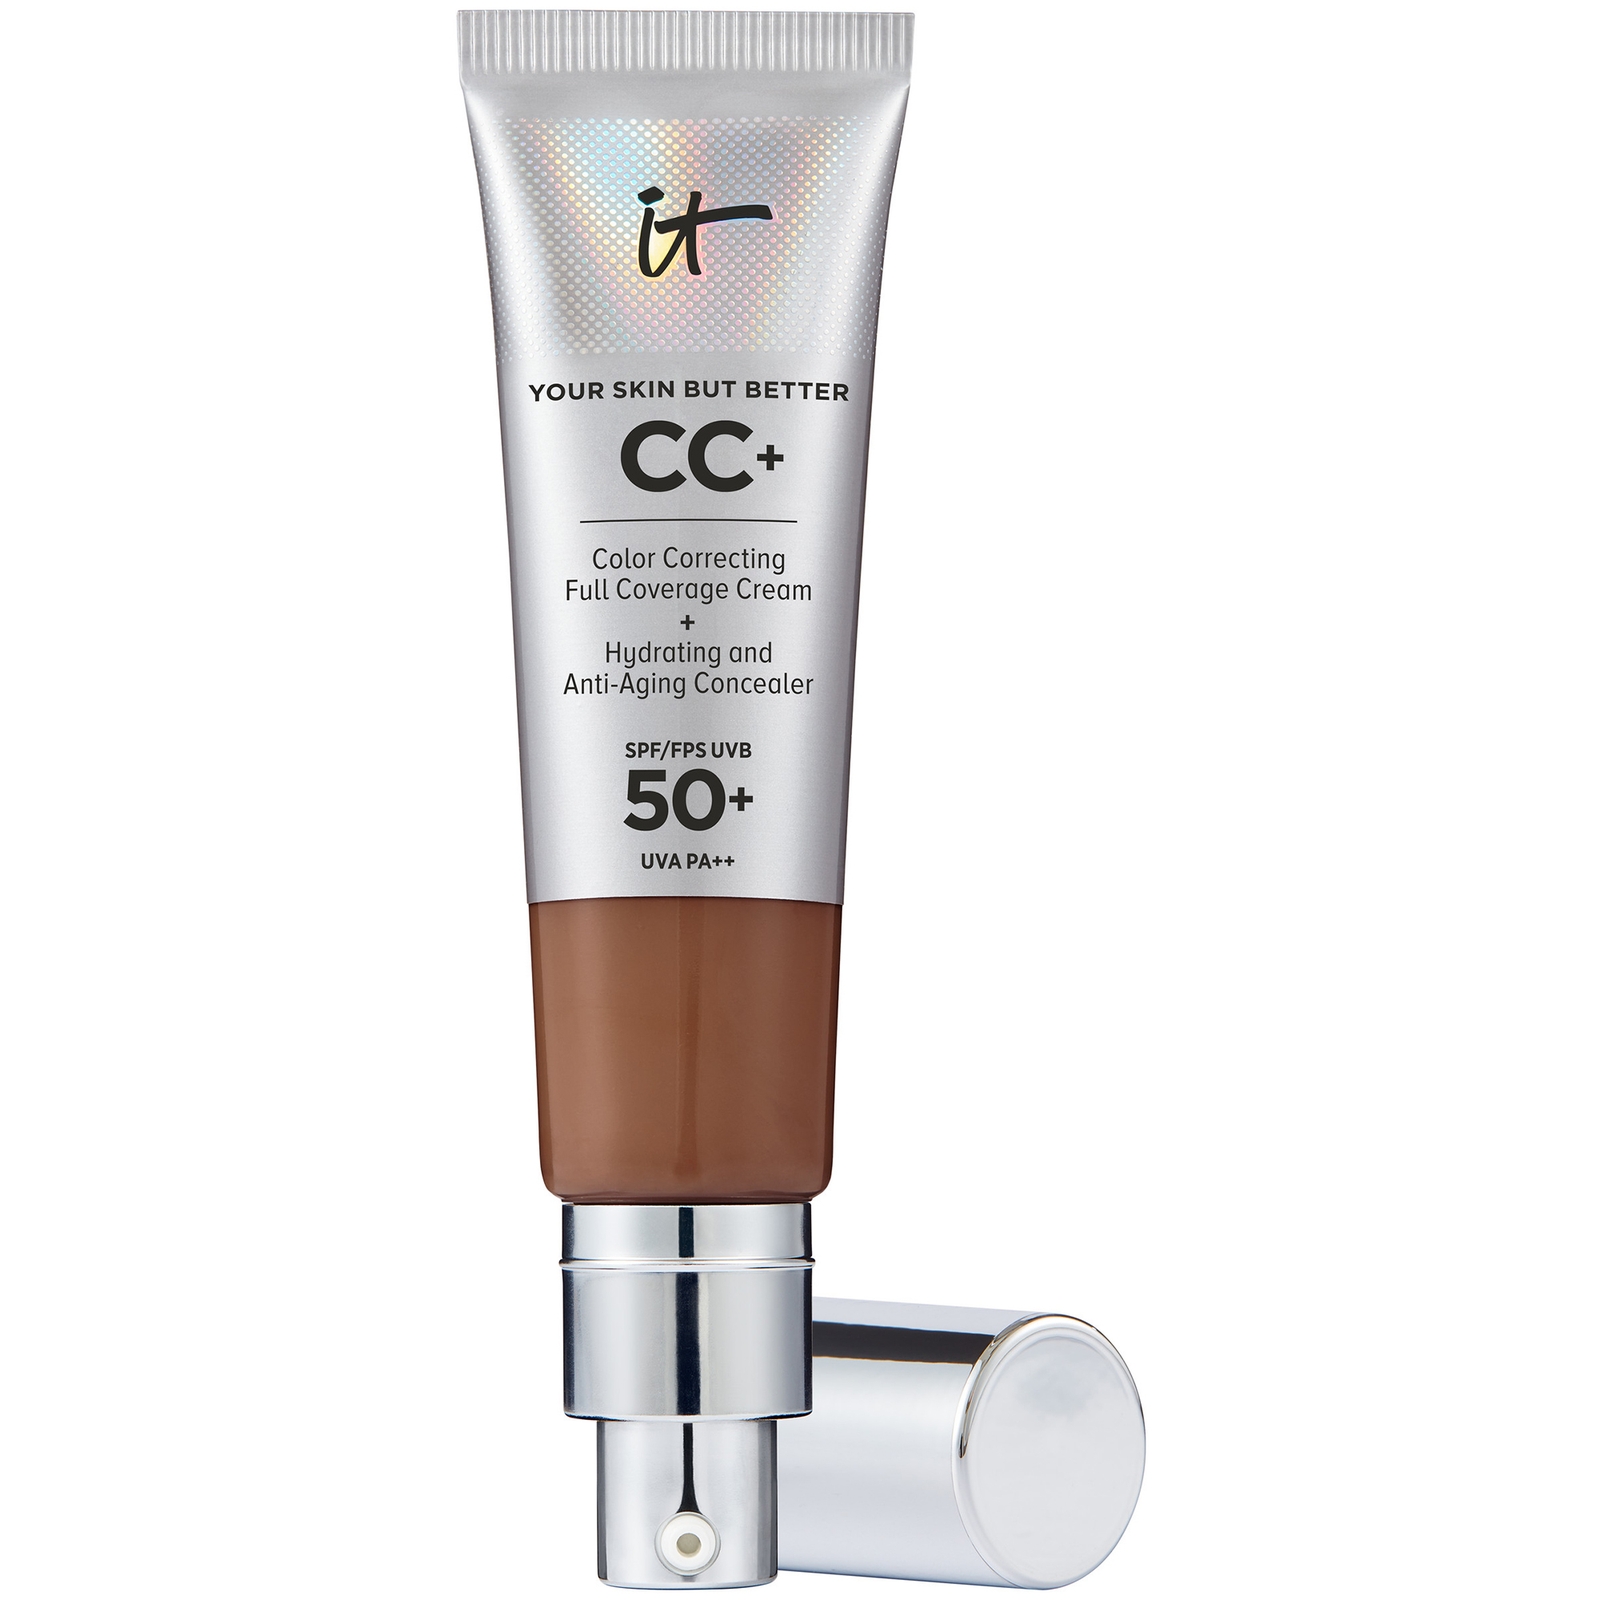 IT Cosmetics Your Skin But Better CC+ Cream with SPF50 32ml (Various Shades) - Deep Honey von IT Cosmetics